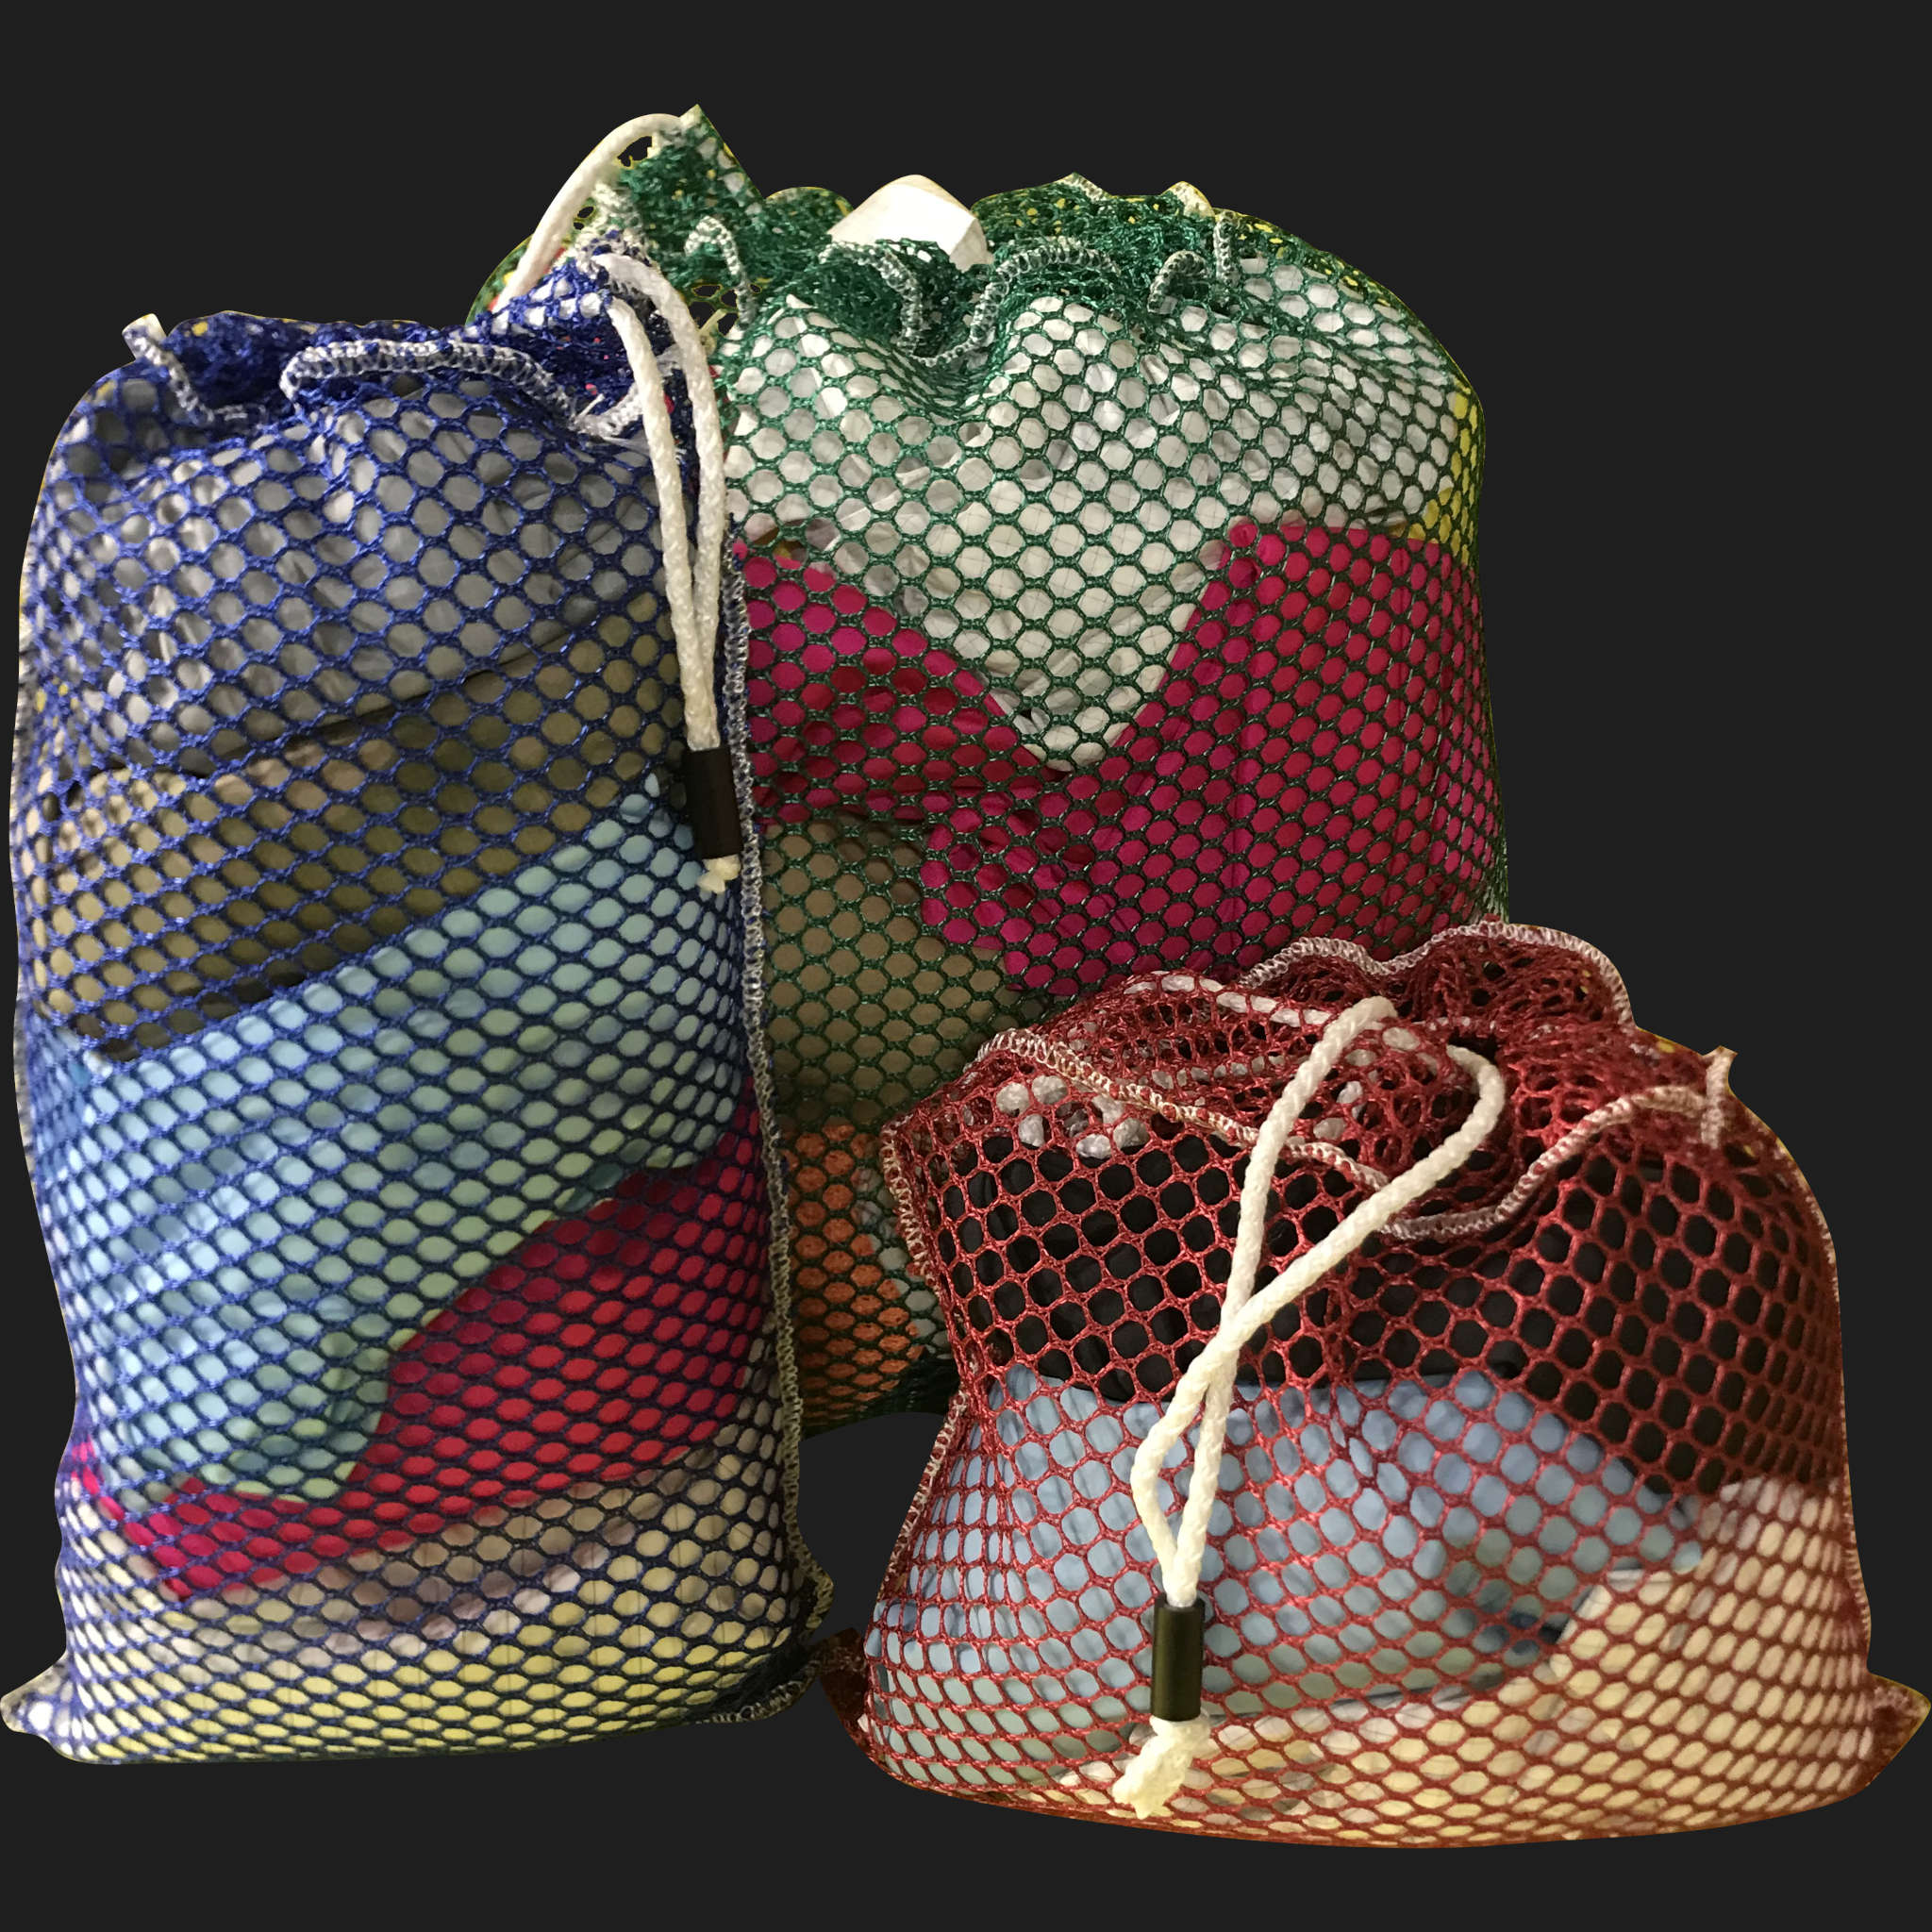 42" x 50" Customized Mesh-Net-Laundry Bags Heavy Duty with Cord and barrellock closure